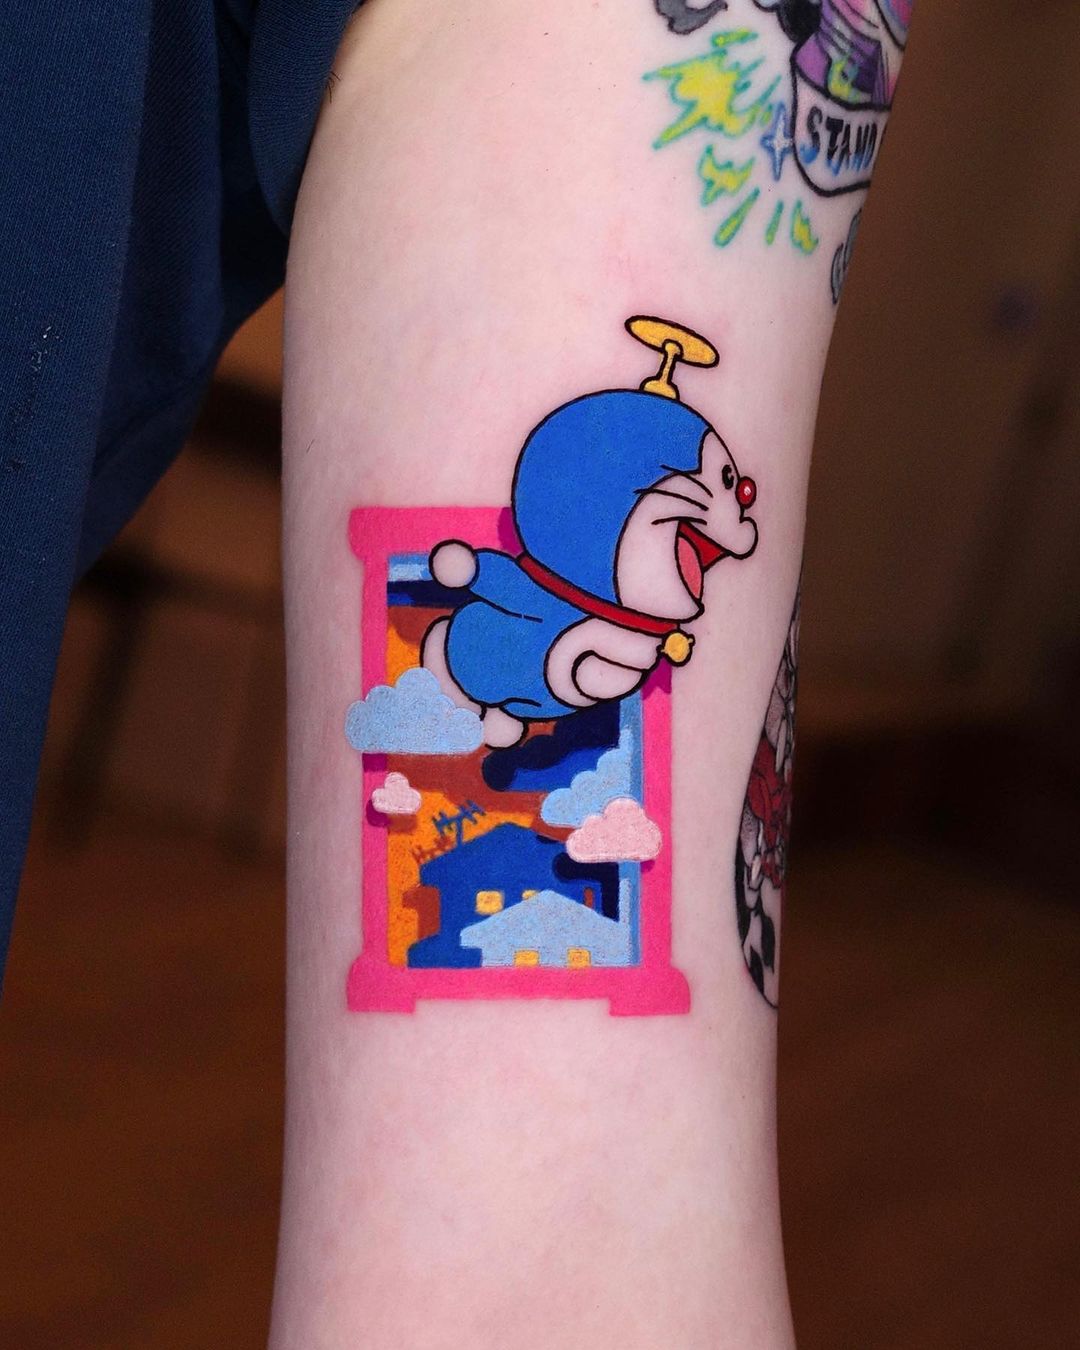 Doraemon tattoo on forarm by zoonmo